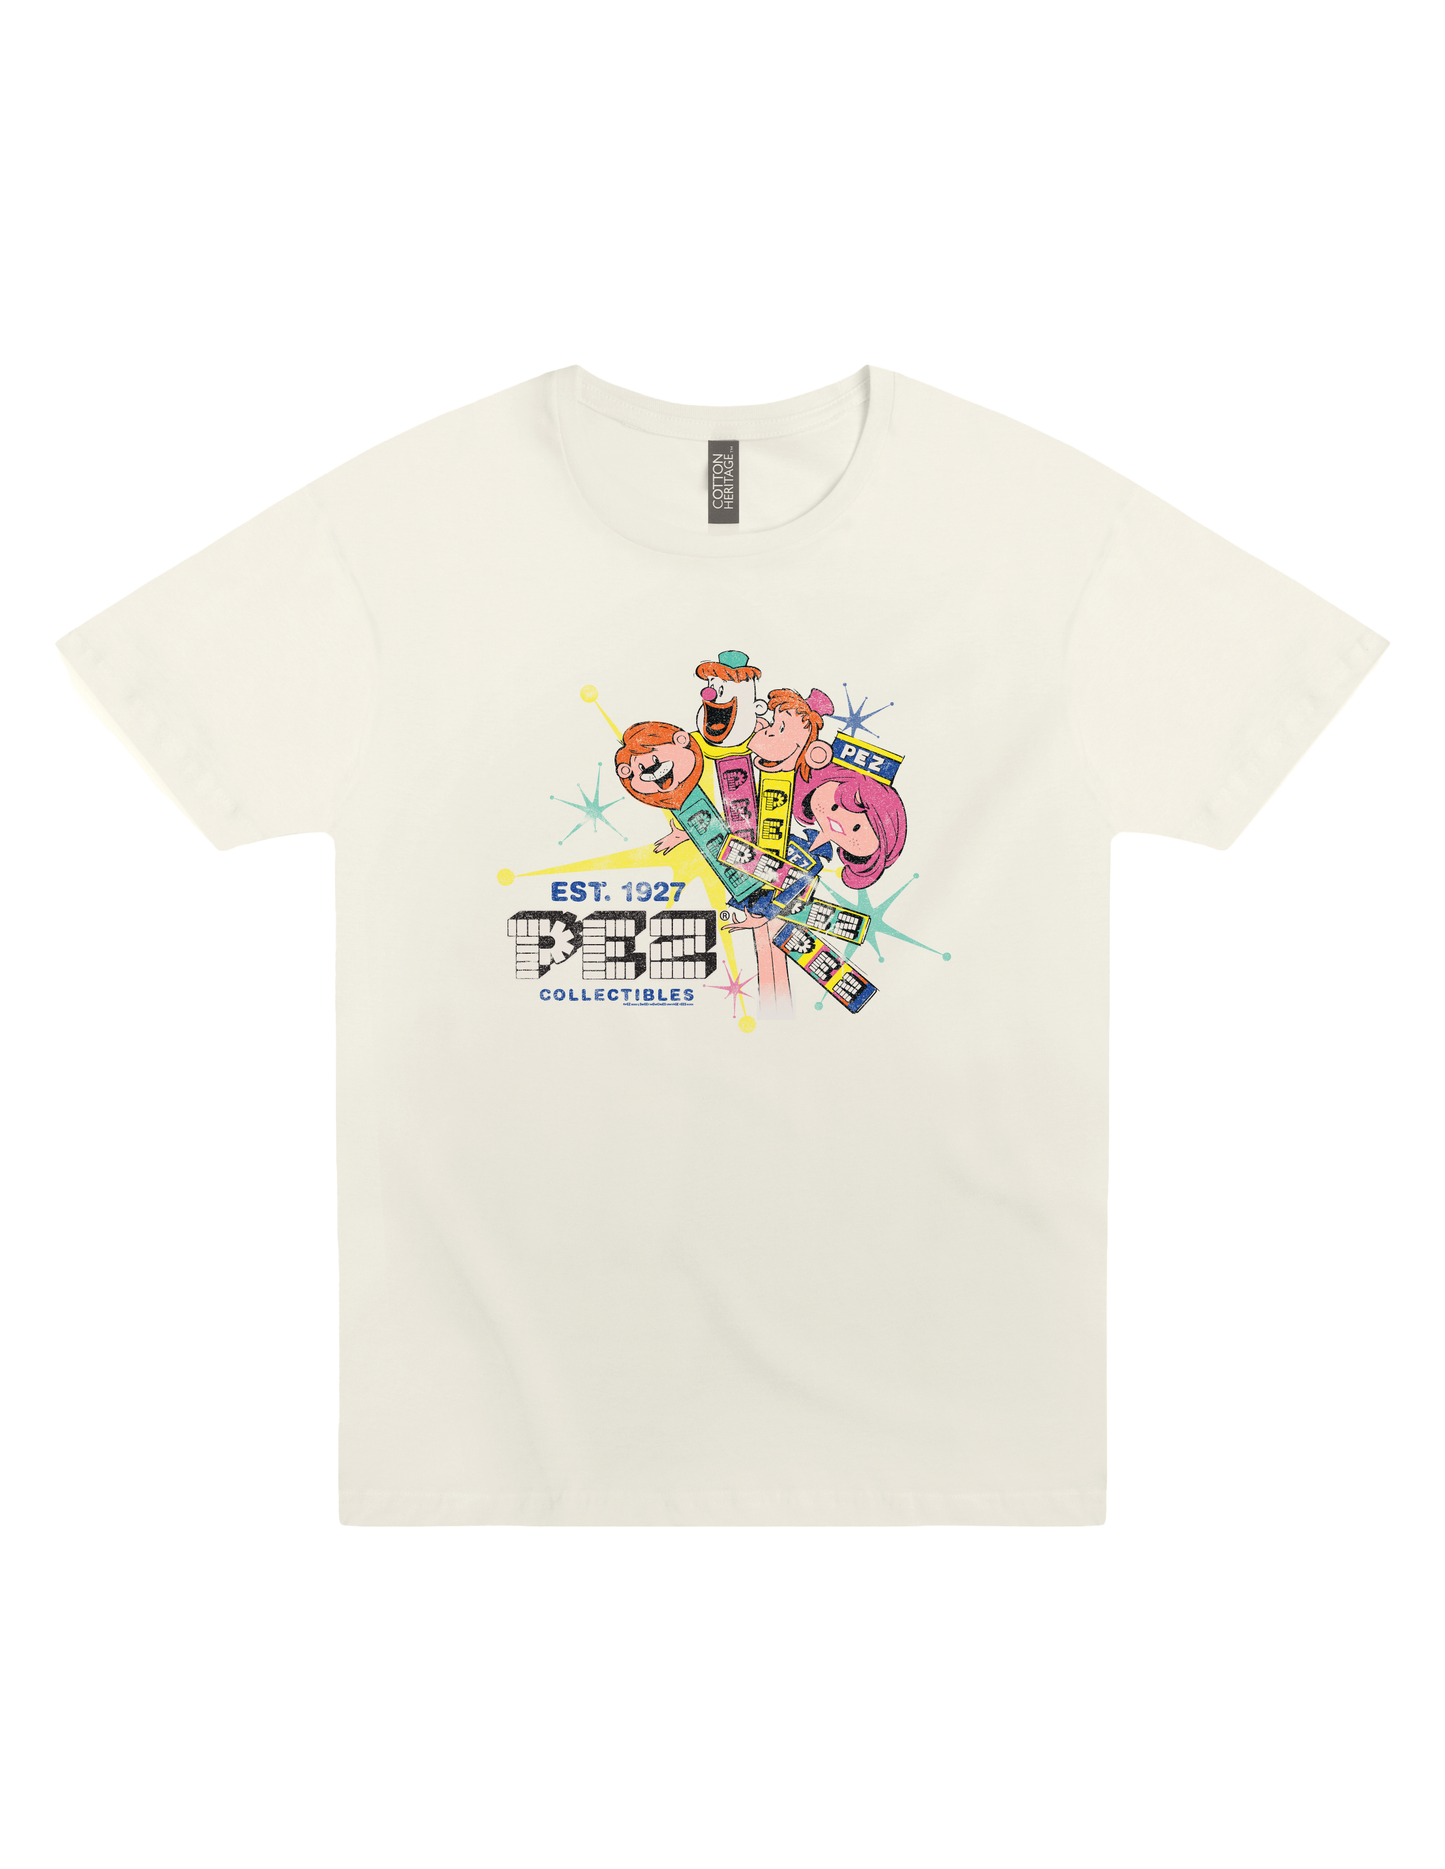 Retro PEZ Assorted Fruit Candy Collectibles Unisex Graphic Tee